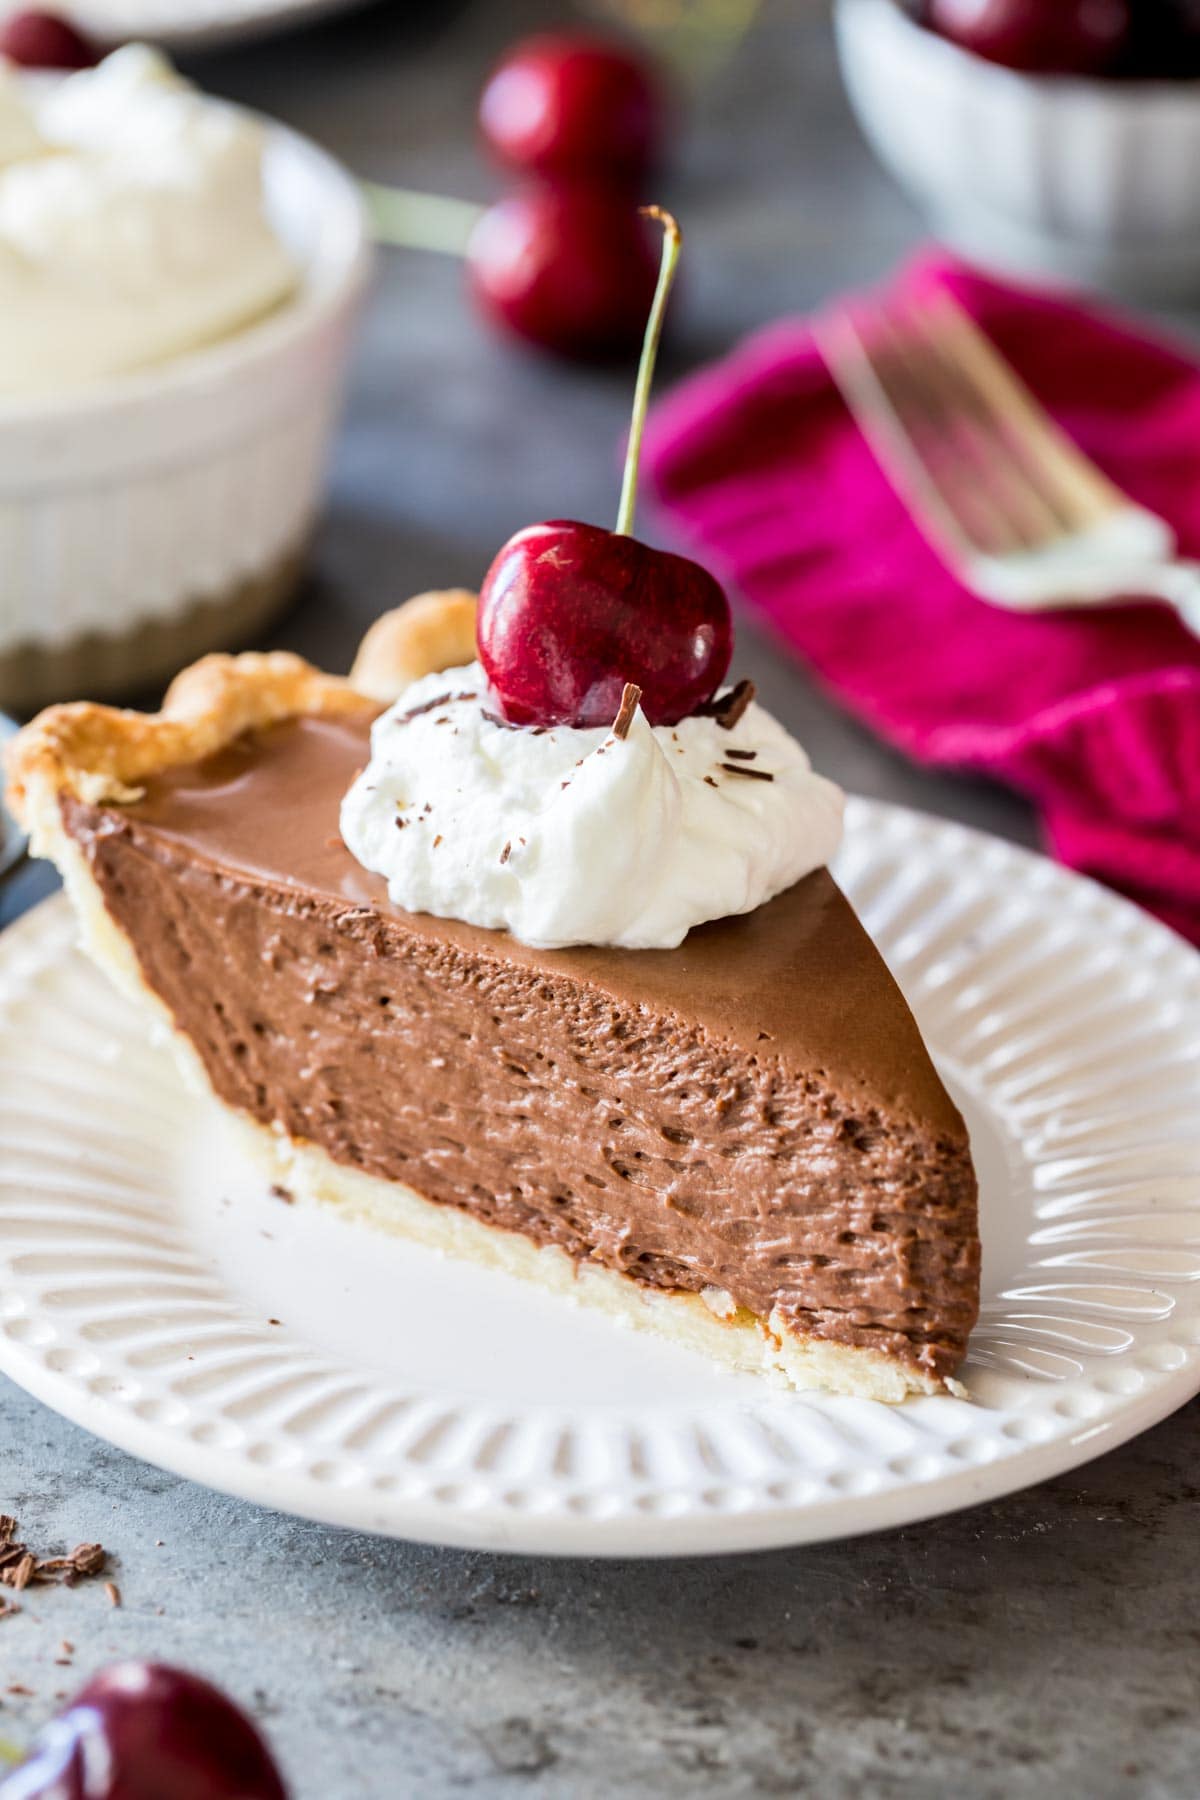 Slice of French silk pie topped with whipped cream and a sweet cherry served on a white plate.